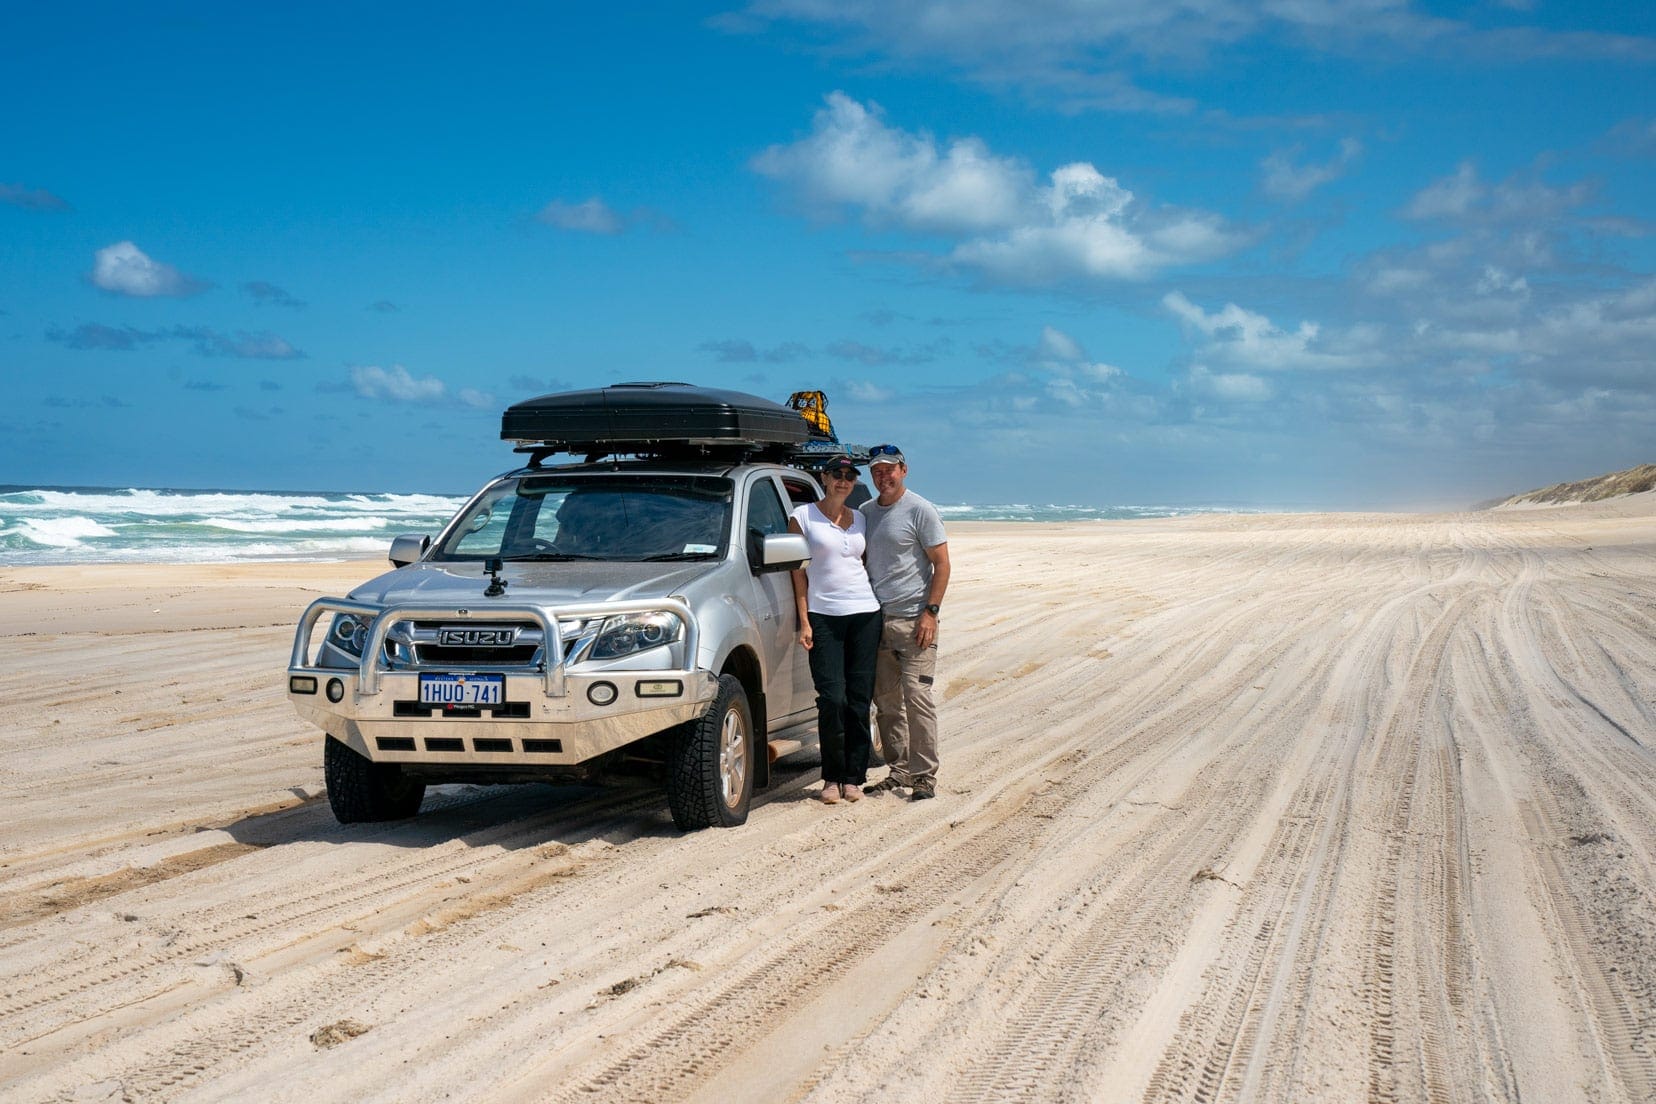 Lars and Shelley on Yeagarup Beach in Western Australia in their 4x4 with roof top tent